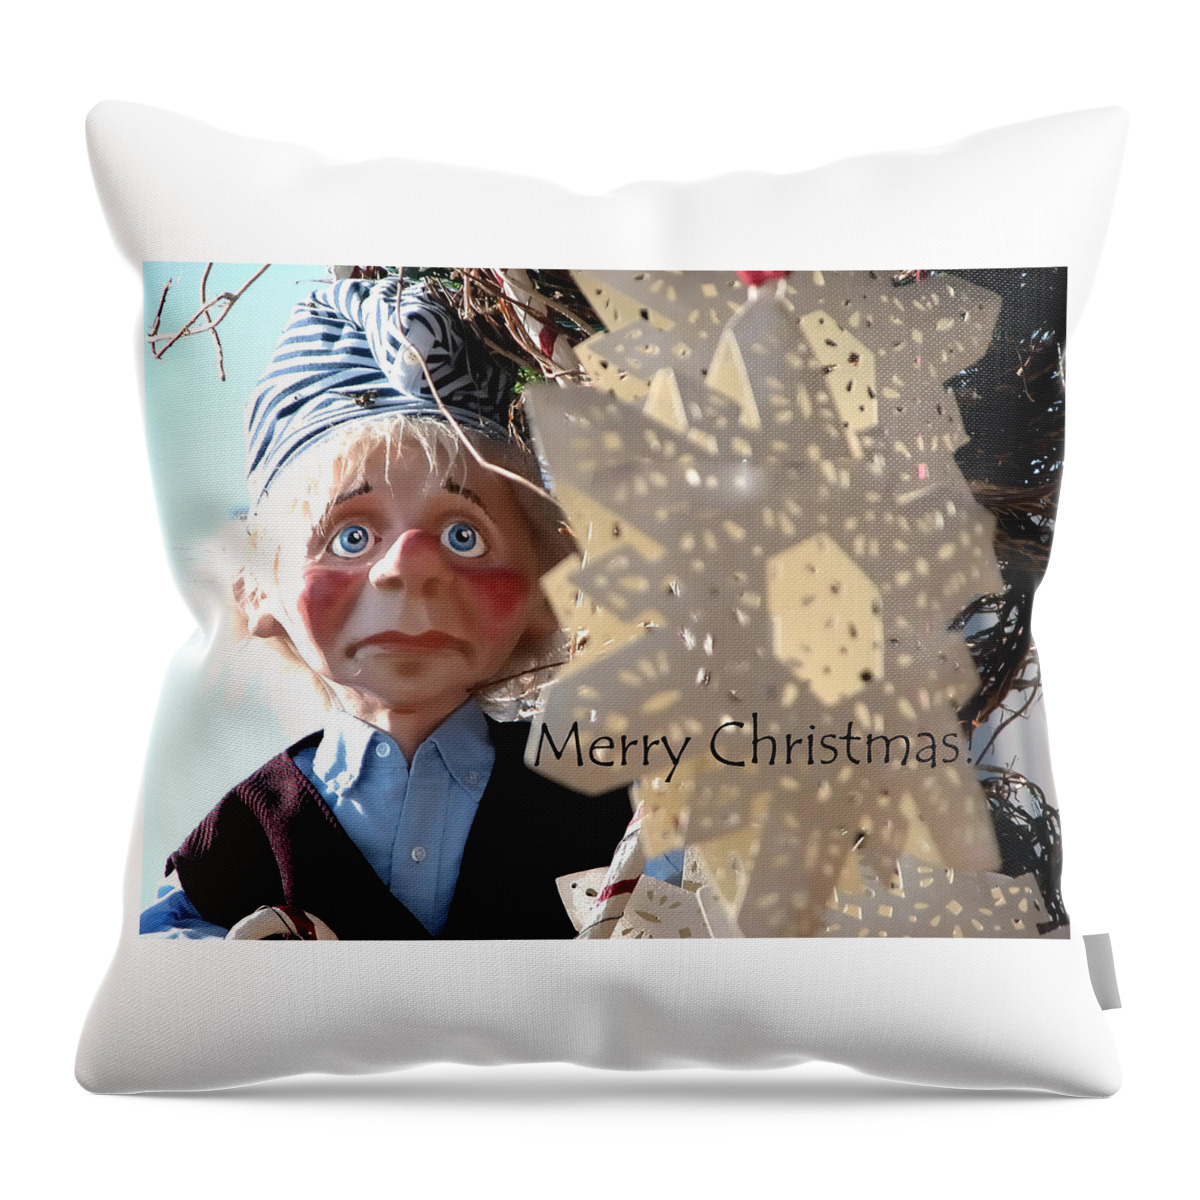 Celebrate Throw Pillow featuring the photograph Merry Christmas Clown 0208 by Jerry Sodorff